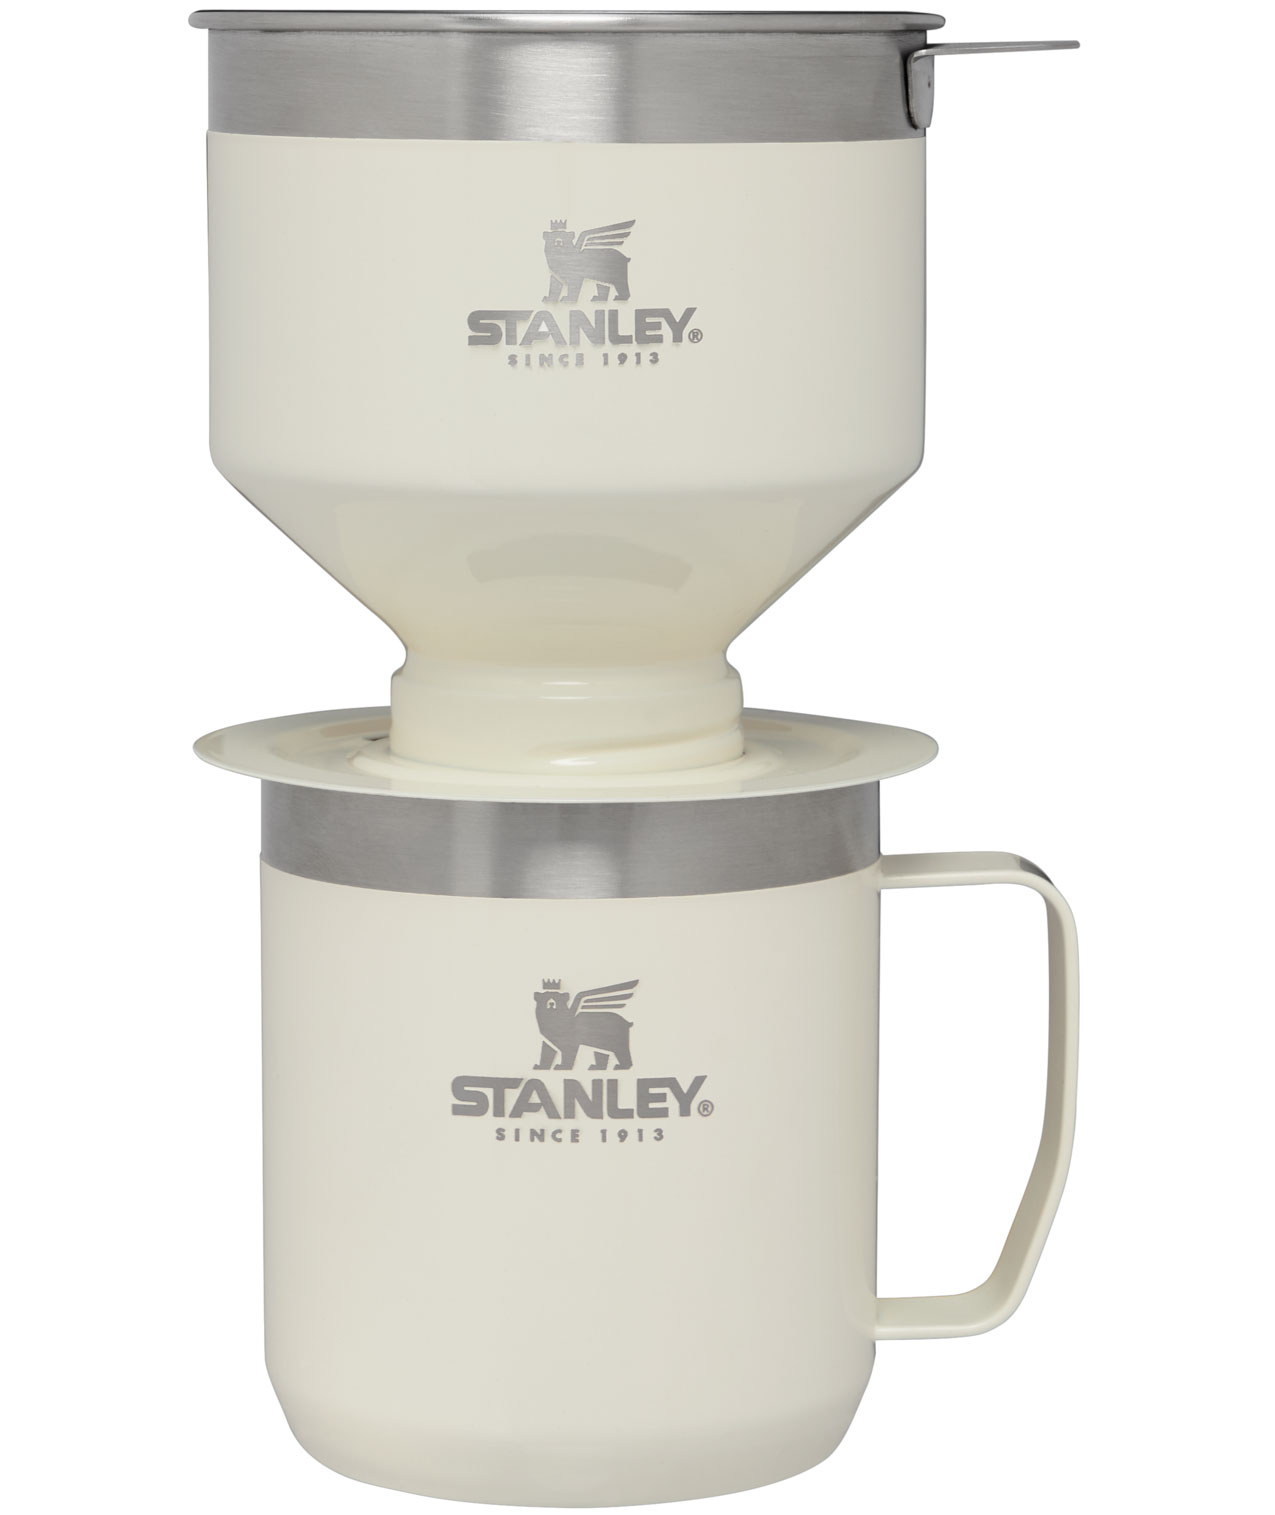 https://op2.0ps.us/original/opplanet-stanley-the-perfect-brew-pour-over-set-cream-gloss-10-09566-080-main